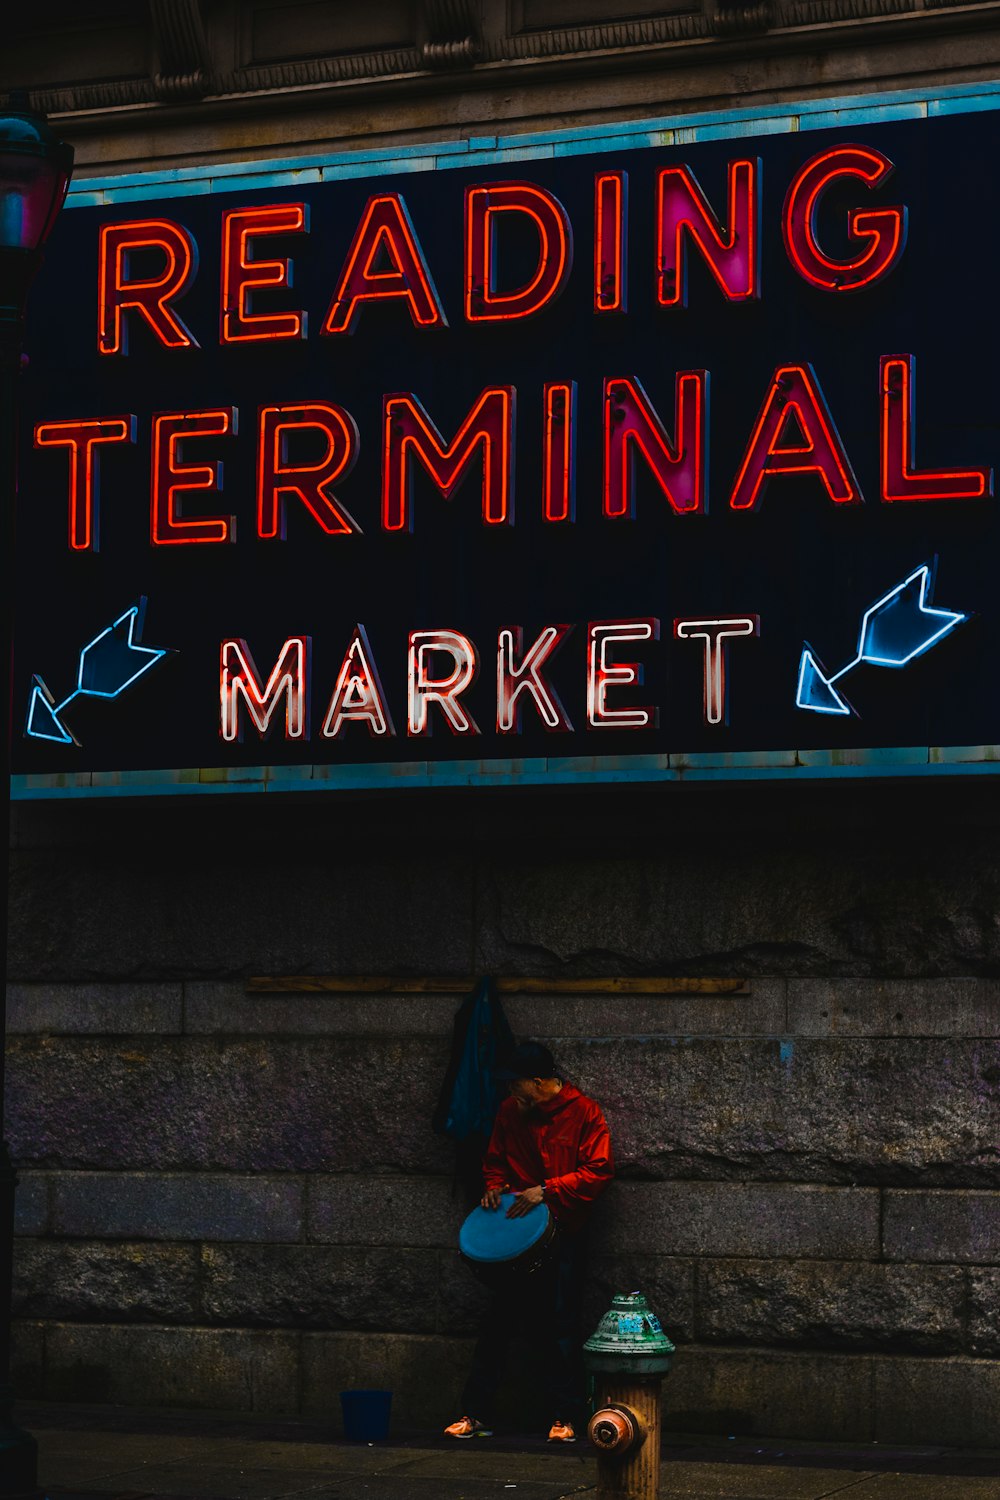 person standing near red and white reading terminal signage